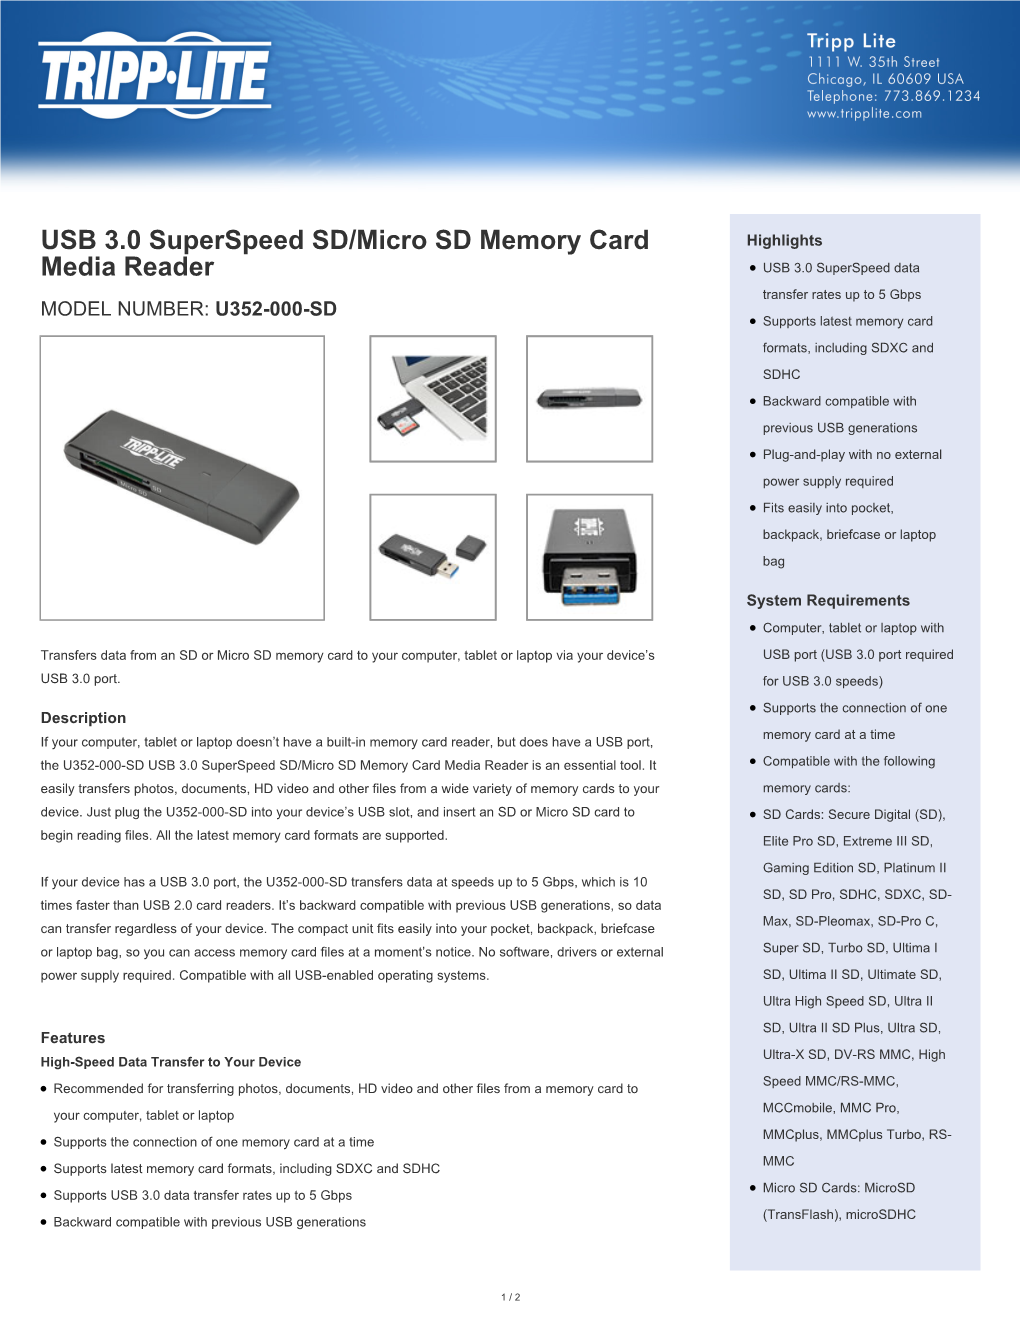 USB 3.0 Superspeed SD/Micro SD Memory Card Media Reader Is an Essential Tool